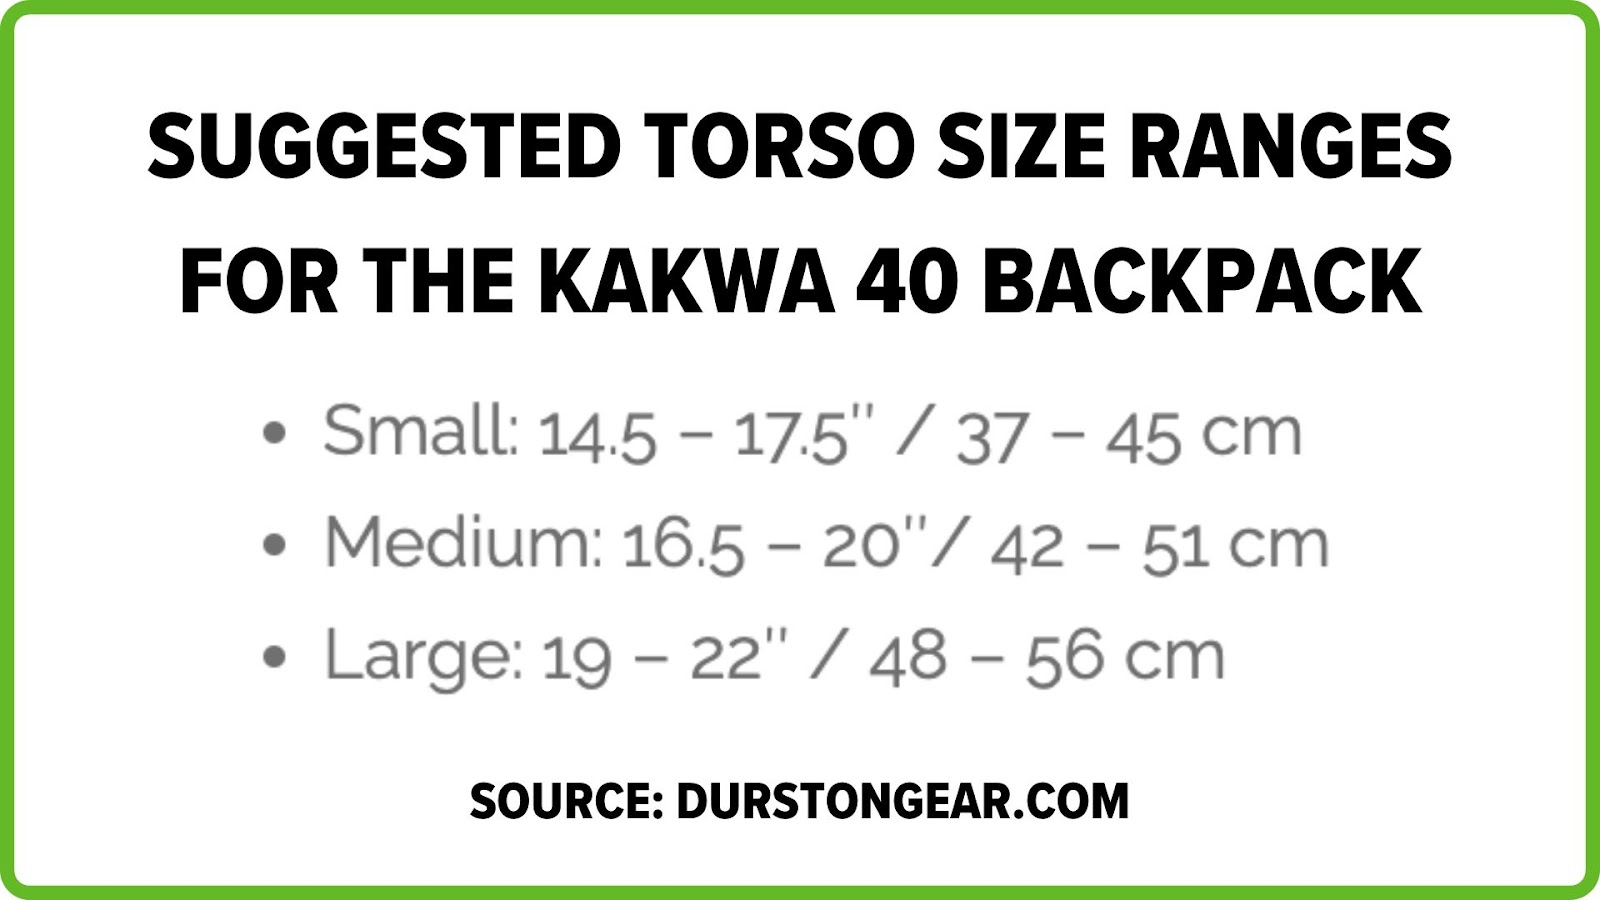 Suggested torso size ranges for the kakwa 40 backpack